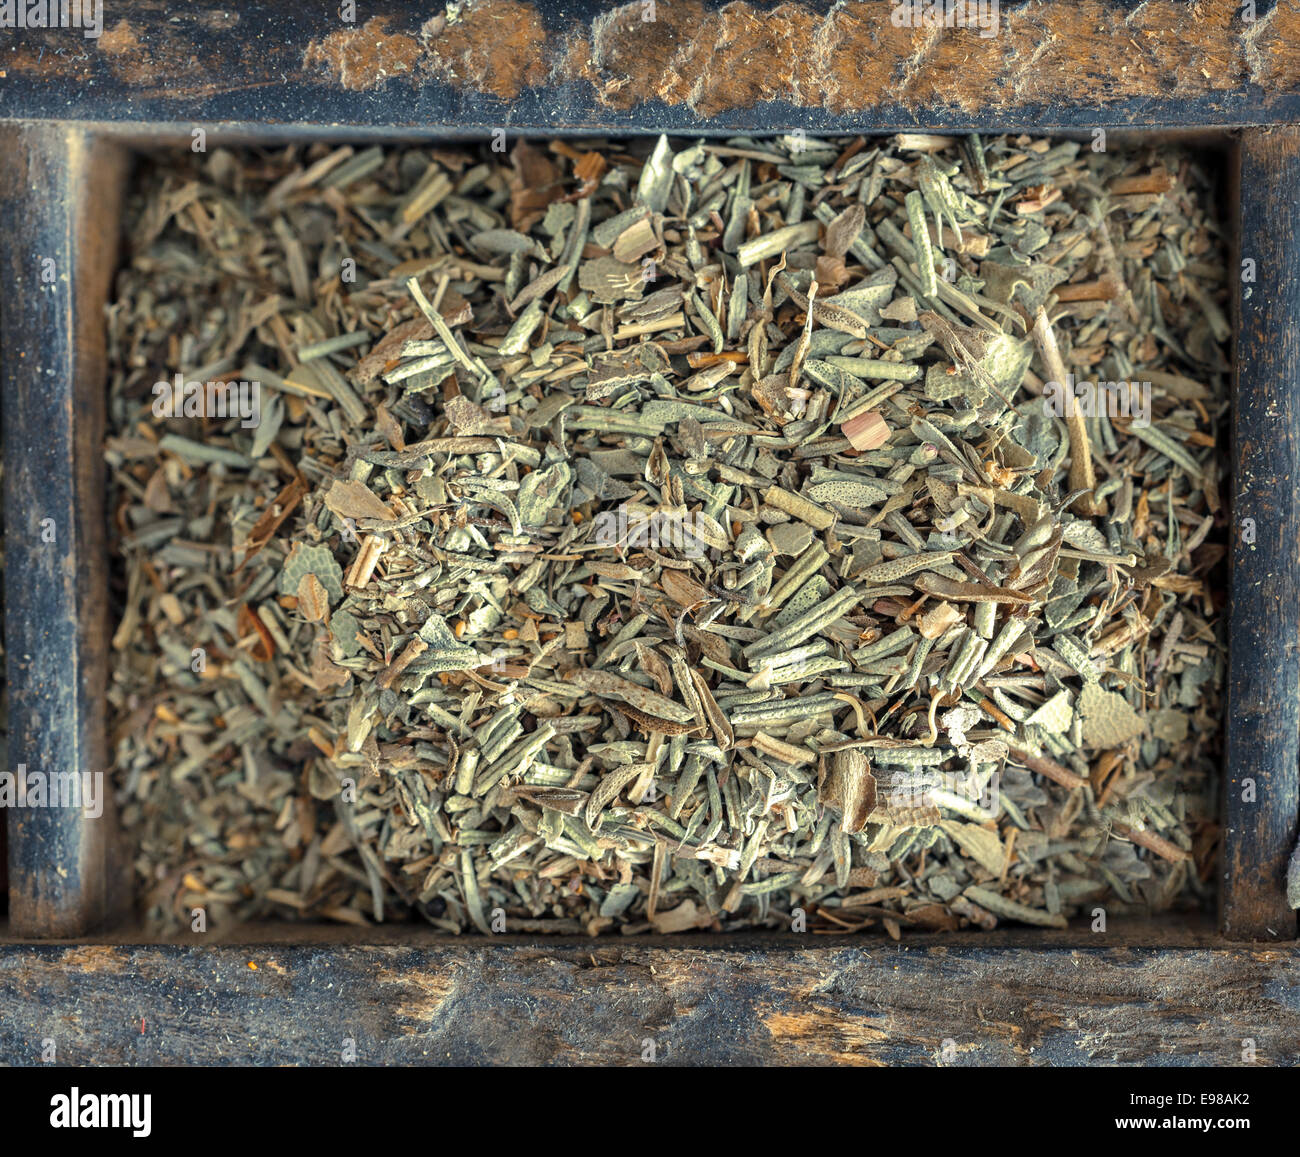 Overhead view of mixed dried herbs with a blend of rosemary, sage, thyme and oregano used as a seasoning in cookery Stock Photo